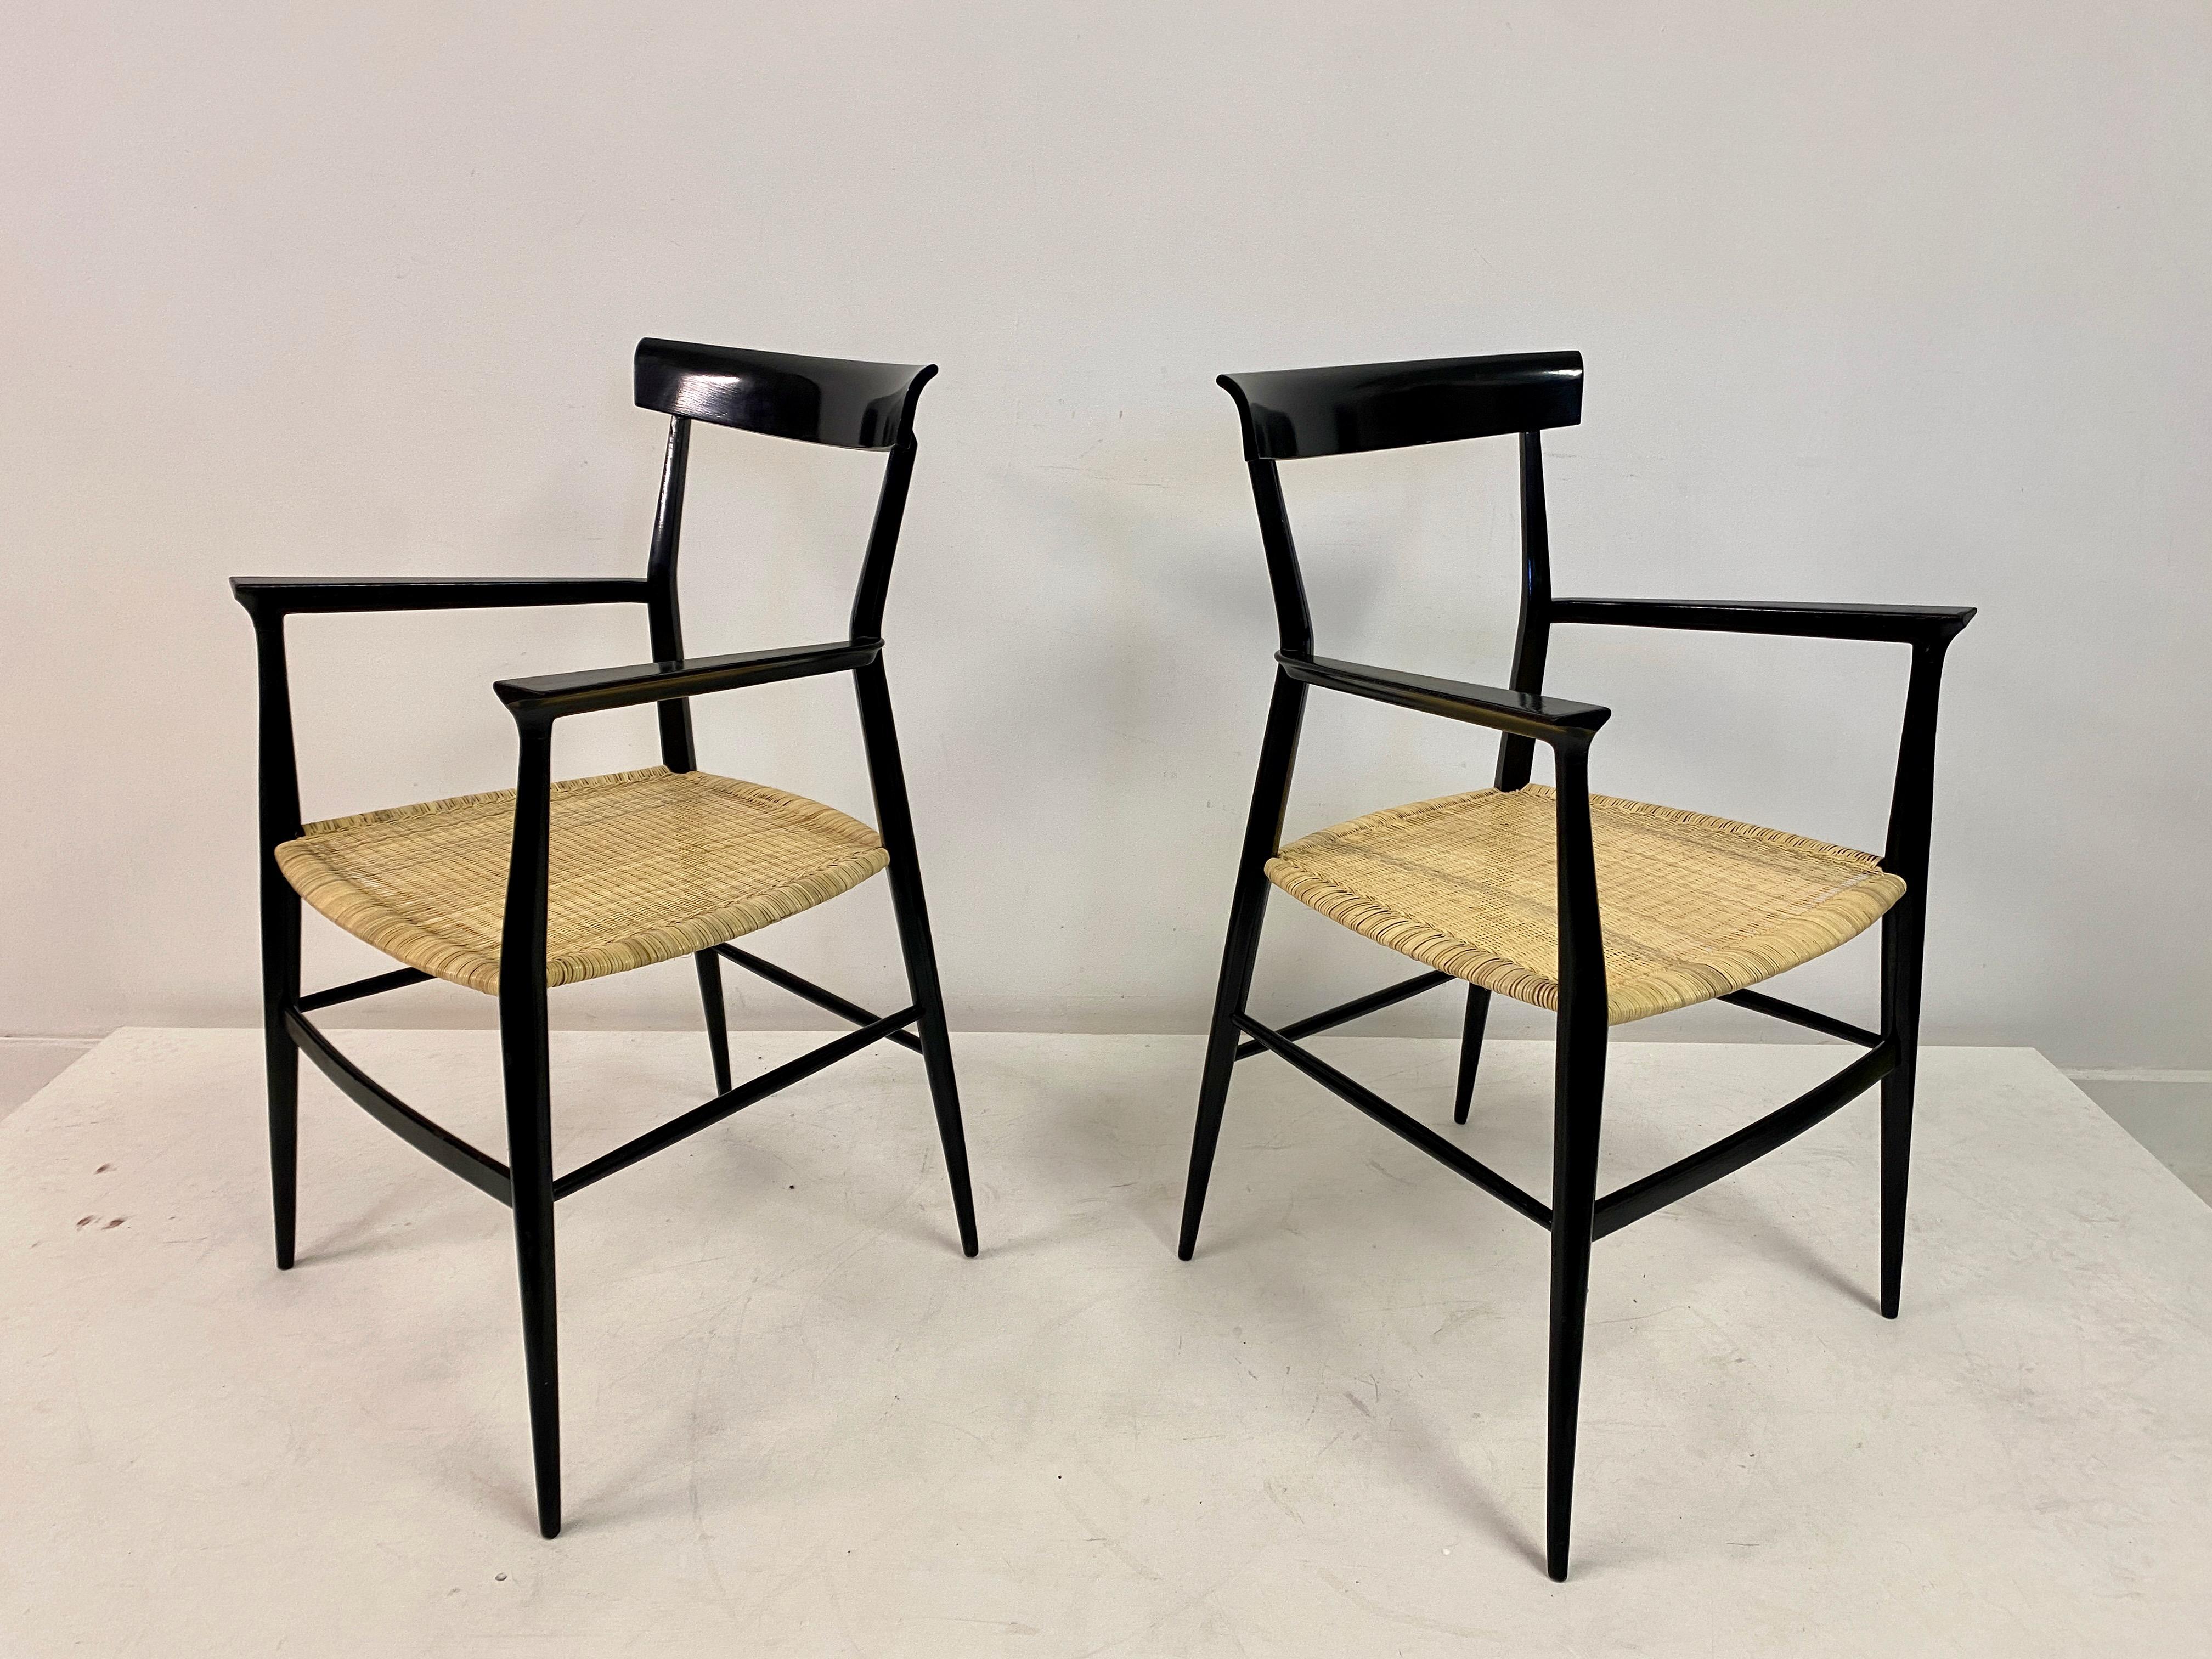 Pair of 1950s Tigullina Chairs by Colombo Sanguineti For Sale 9